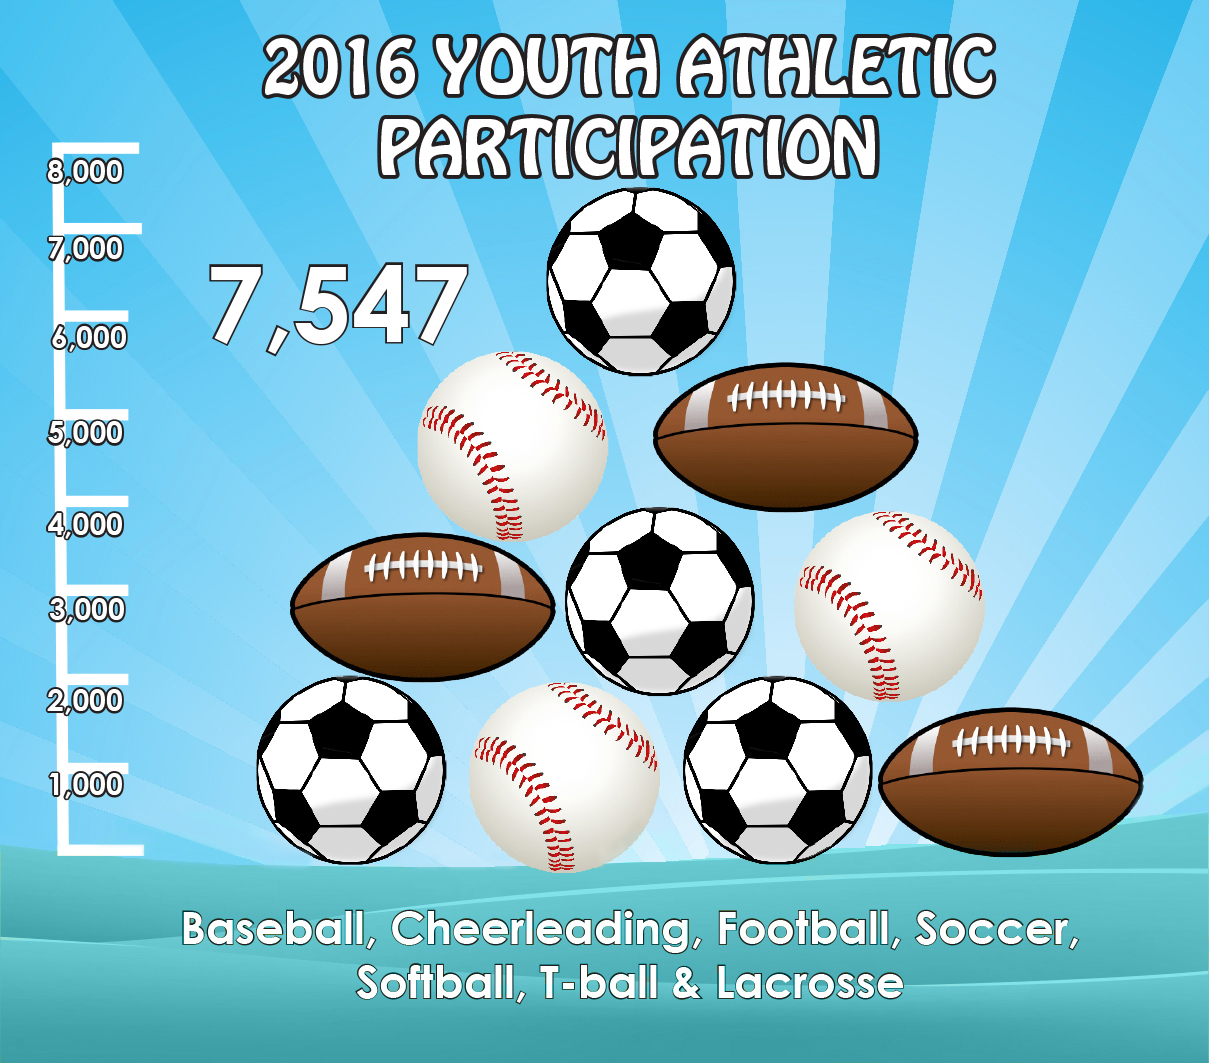 2016 Youth Athletic Participation 